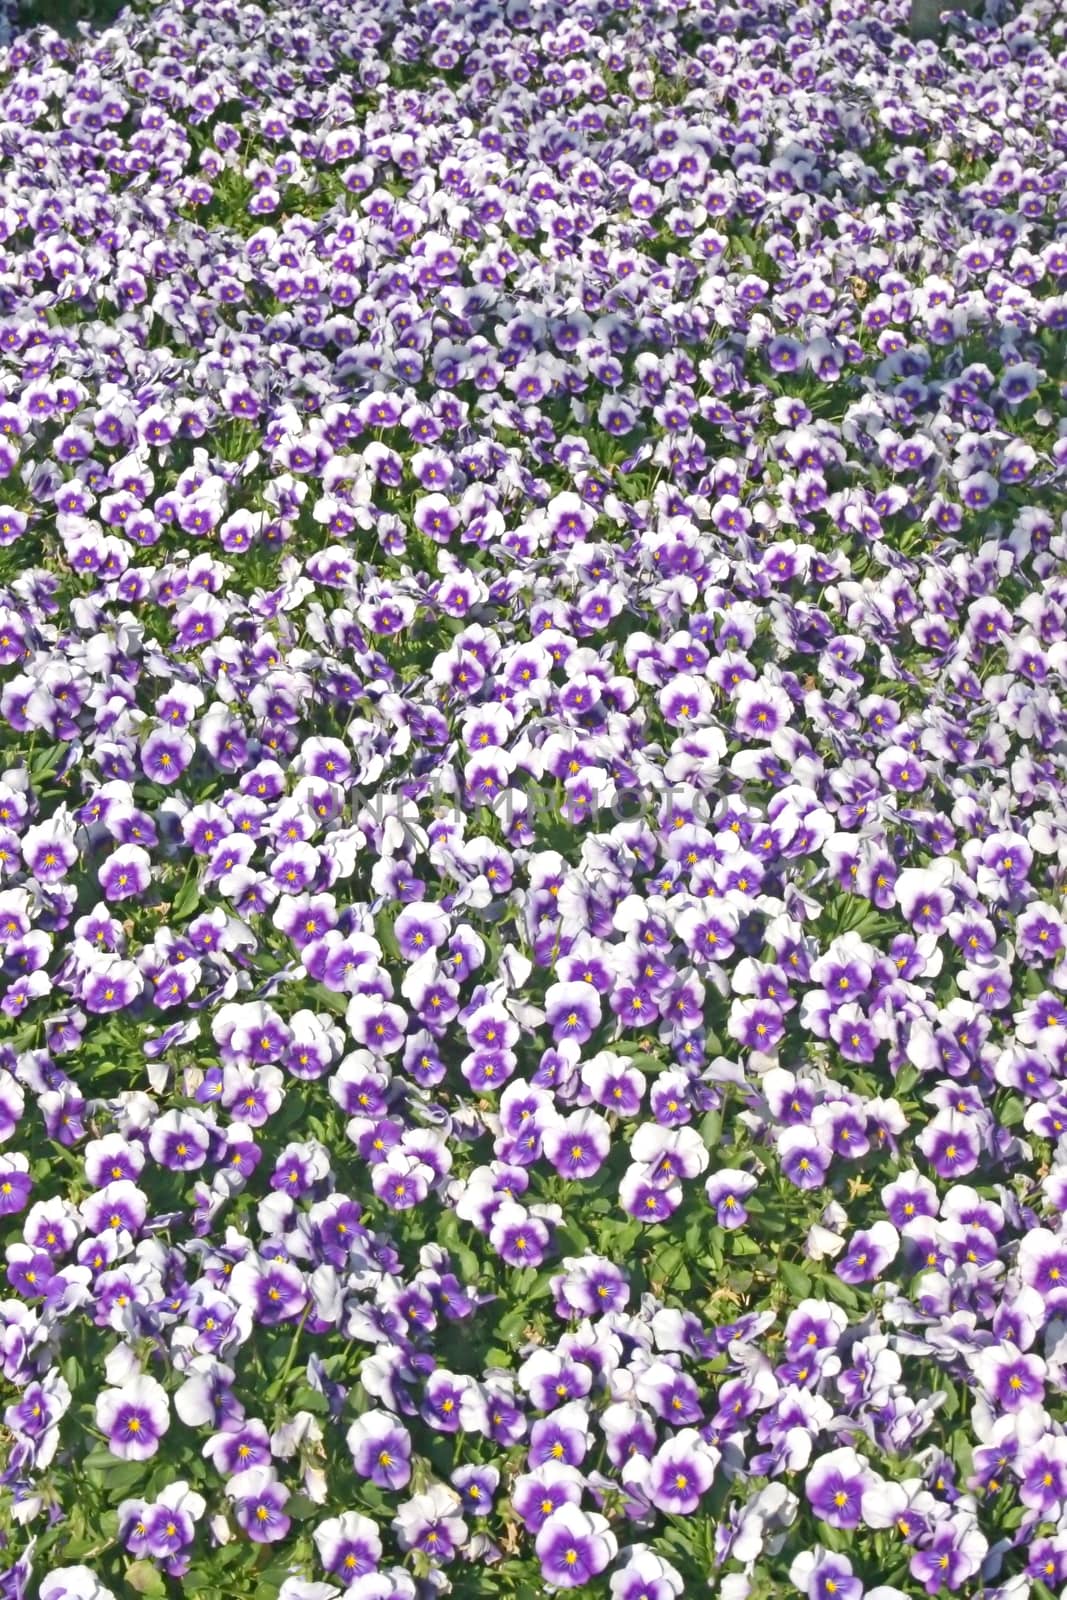 A lot of white and purples pansies